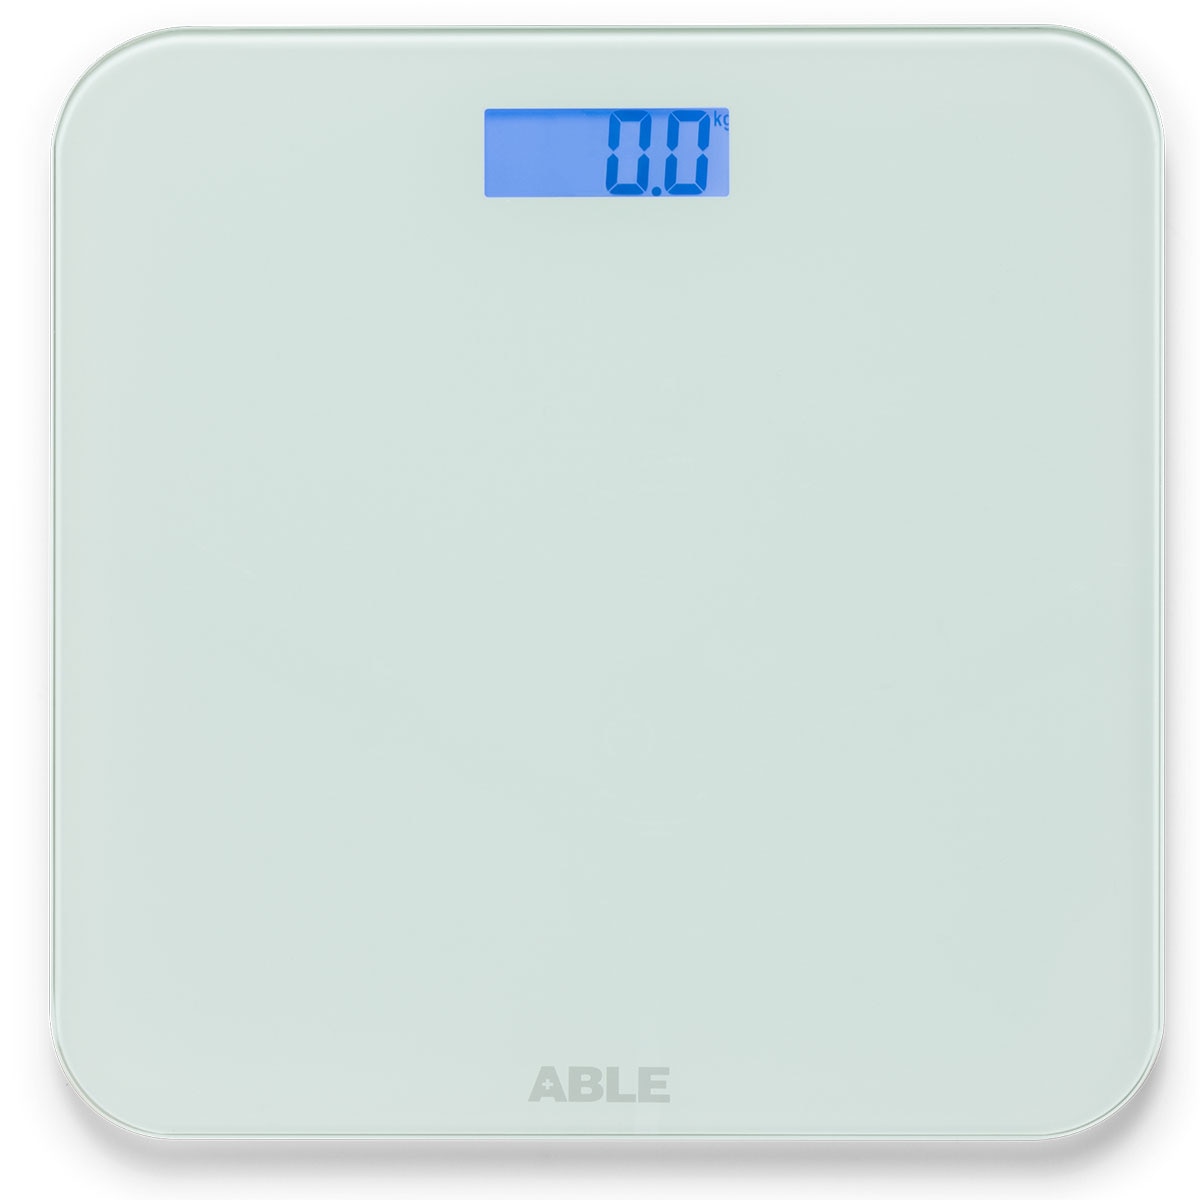 ABLE Digital Weight Scale